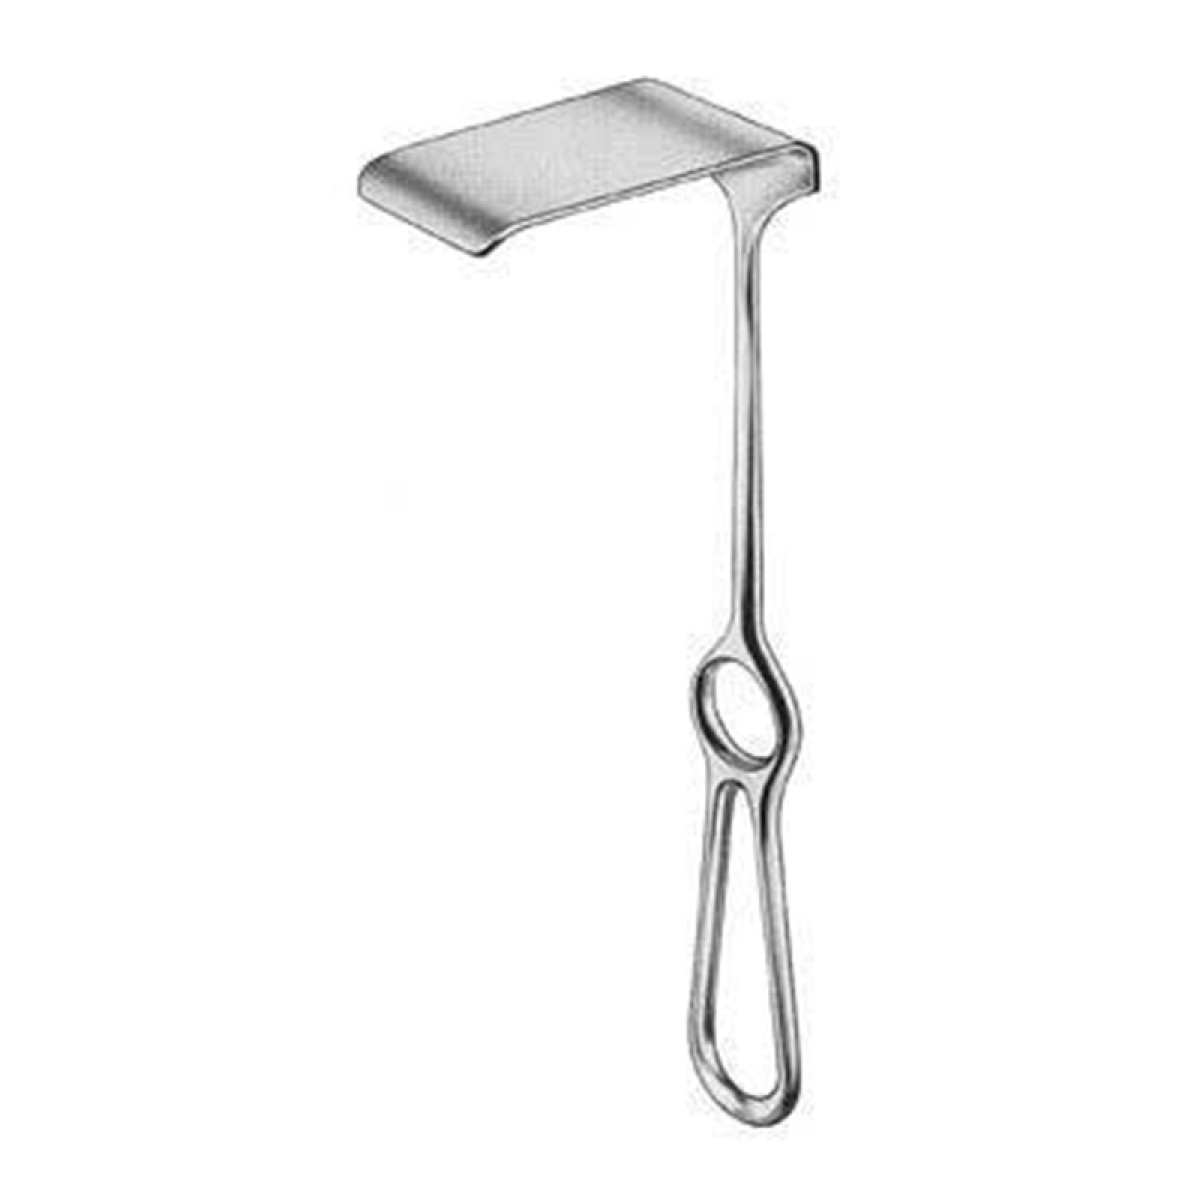 Morris Retractor Surgical Instruments General Surgical Instruments Manufacturer And